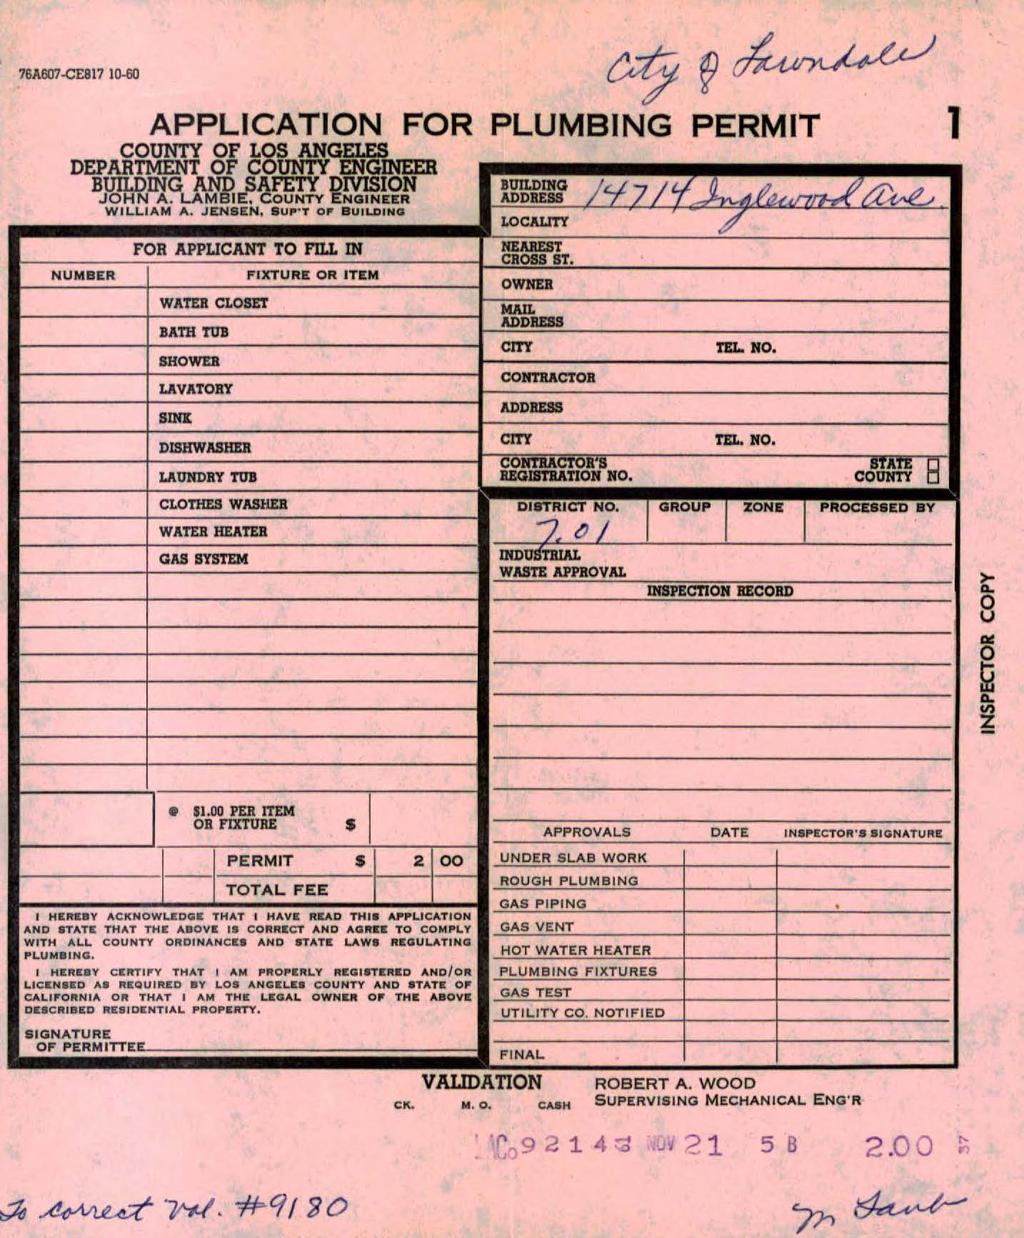 76A607-CE817 10-60 APPLICATION FOR PLUMBING PERMIT COUNTY OF LOS ANGELES DEPARTMENT OF COUNTY ENGINEER JOHN A. LAMBIE. COUNTY Engineer WILLIAM A.